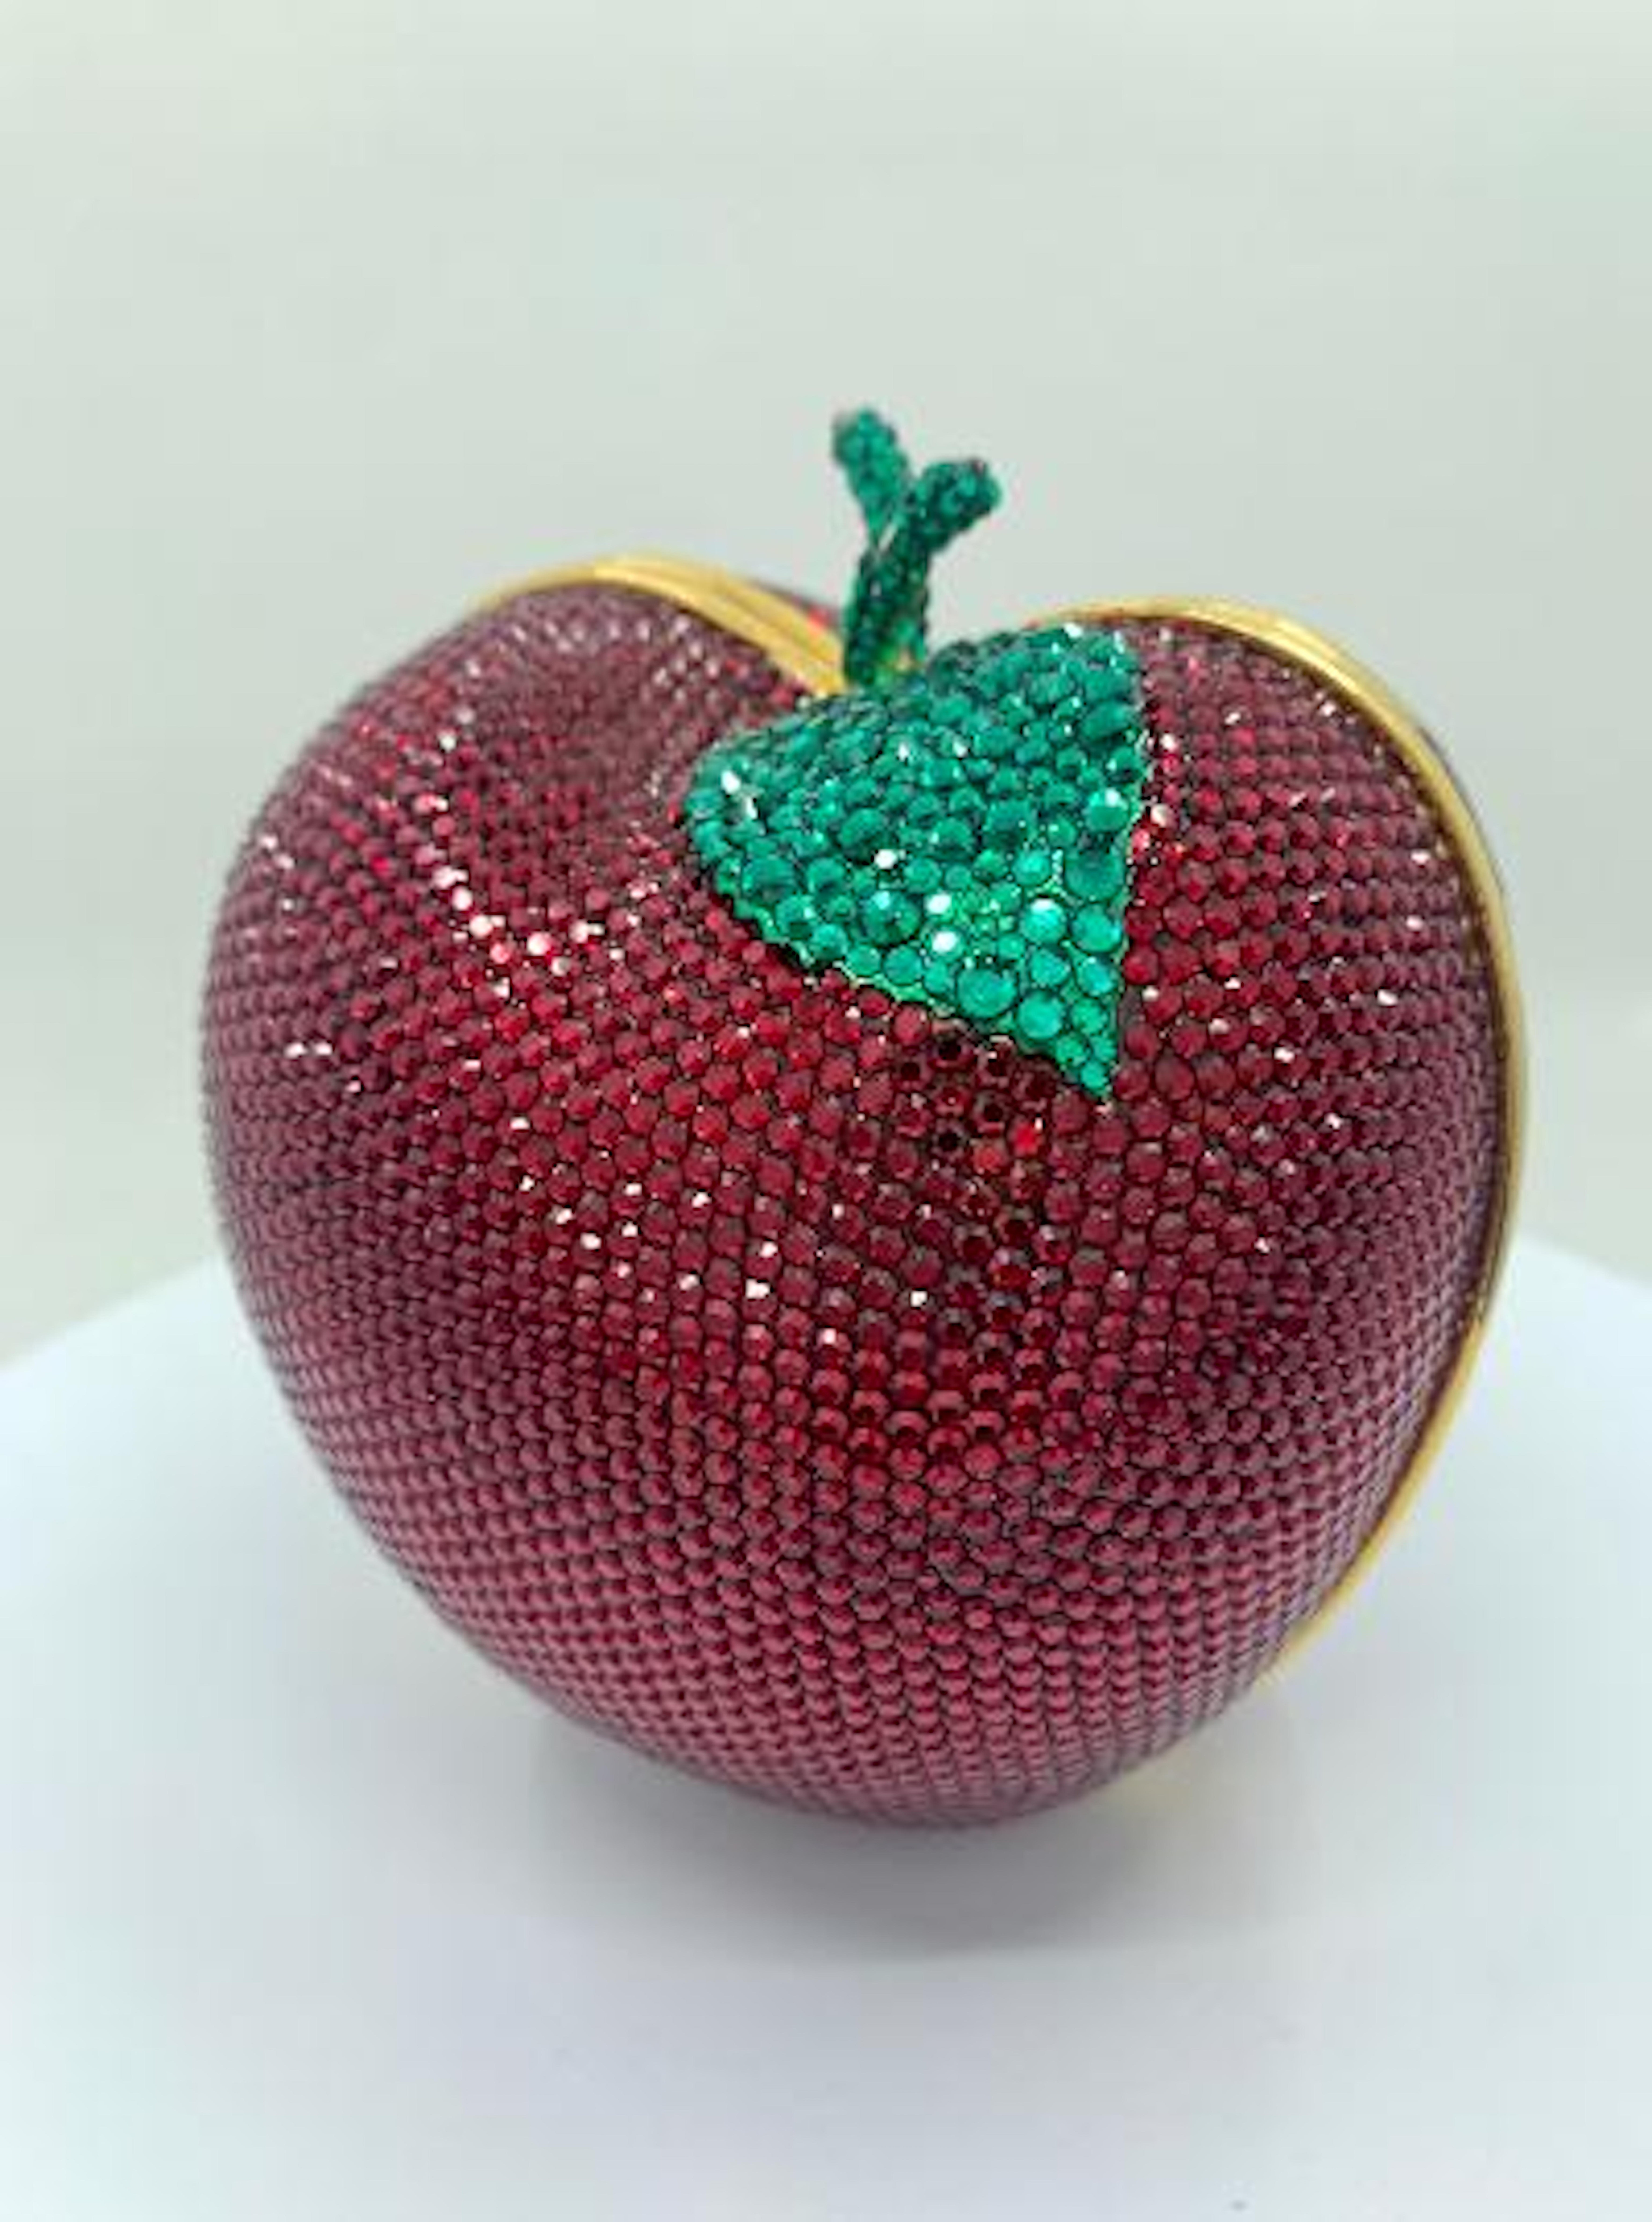 A limited-edition, signed and numbered, Swarovski crystal encrusted, gold-plated metal Snow White's red apple shaped minaudière evening bag purse by Kathrine Baumann, who is the celebrated handbag maker to the stars. Originally purchased at